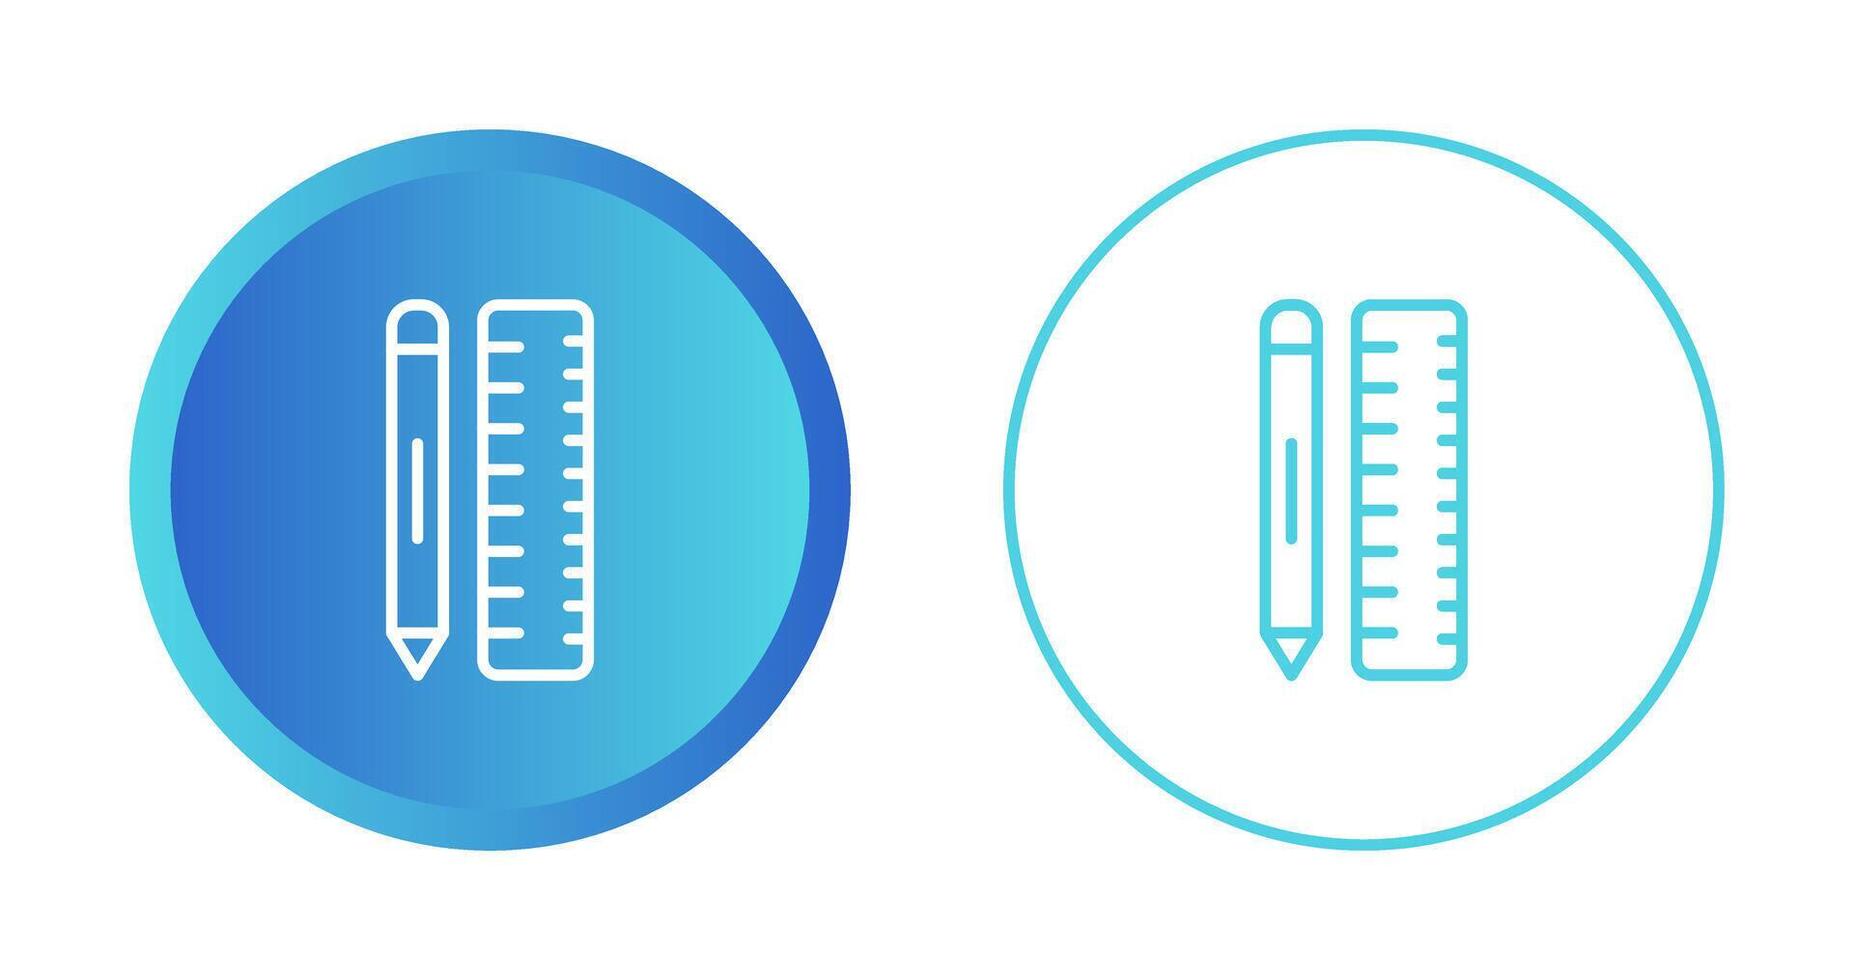 Pencil with Ruler Vector Icon